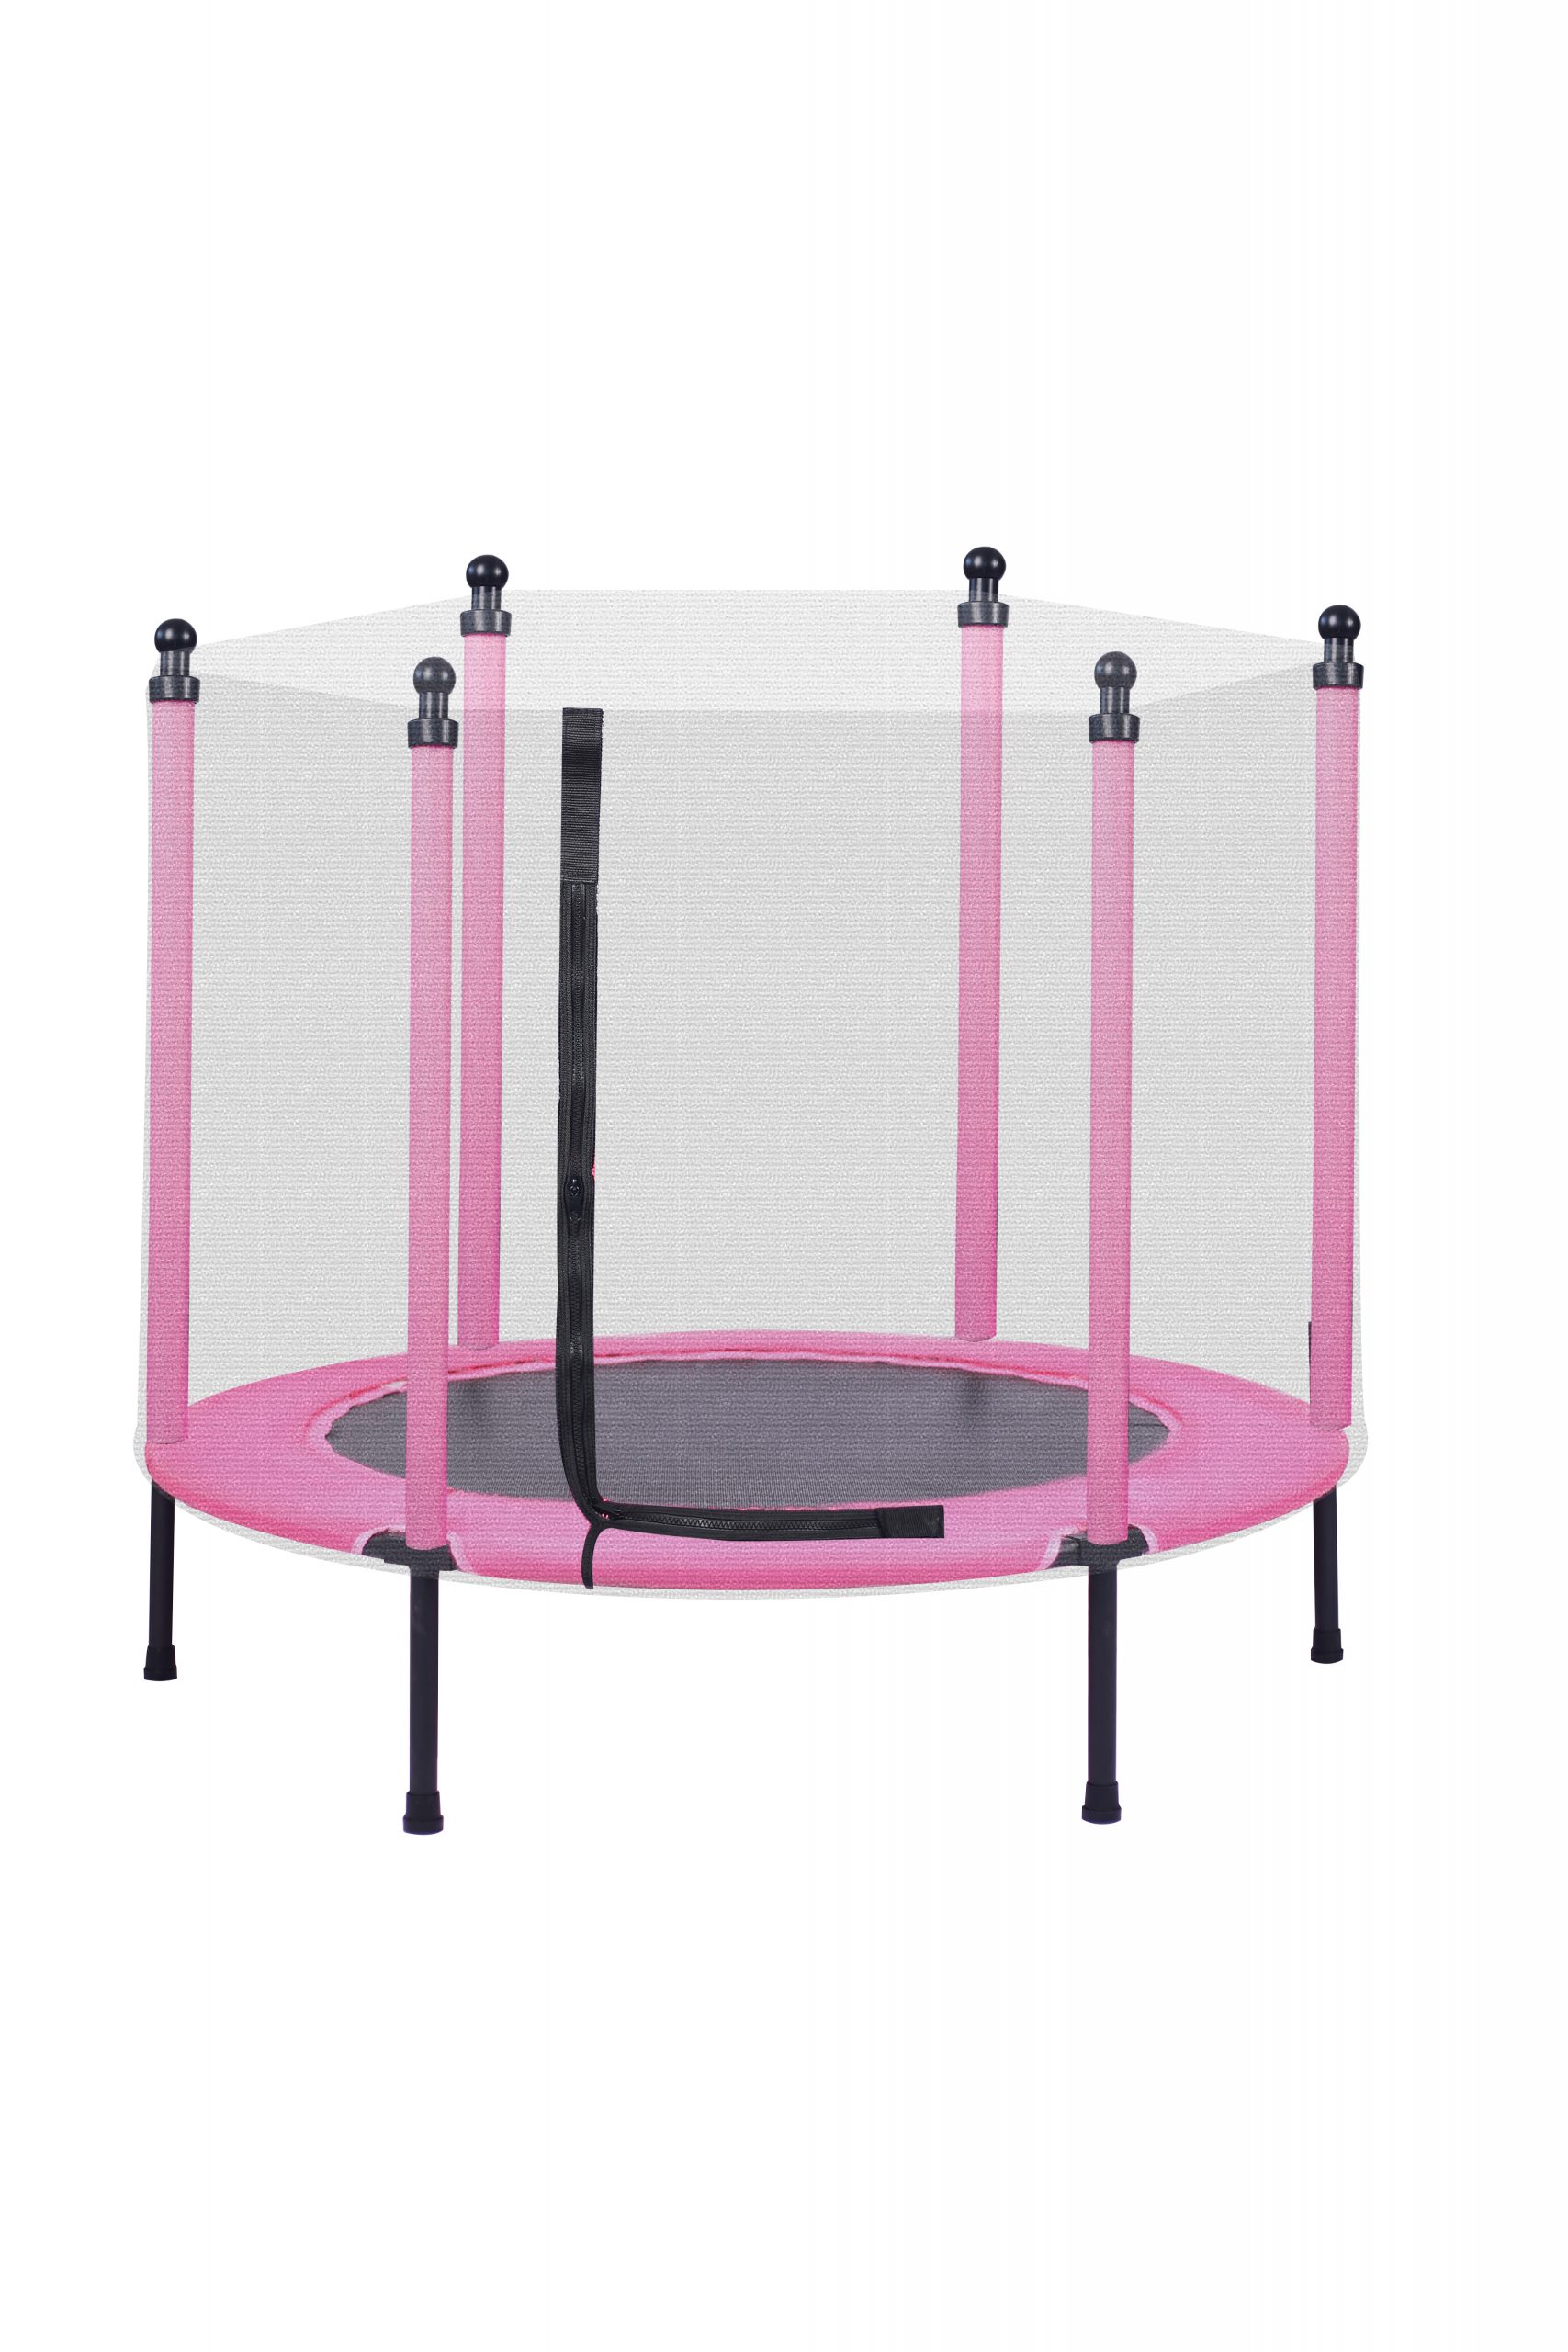 48in Toddler Trampoline with Enclosure